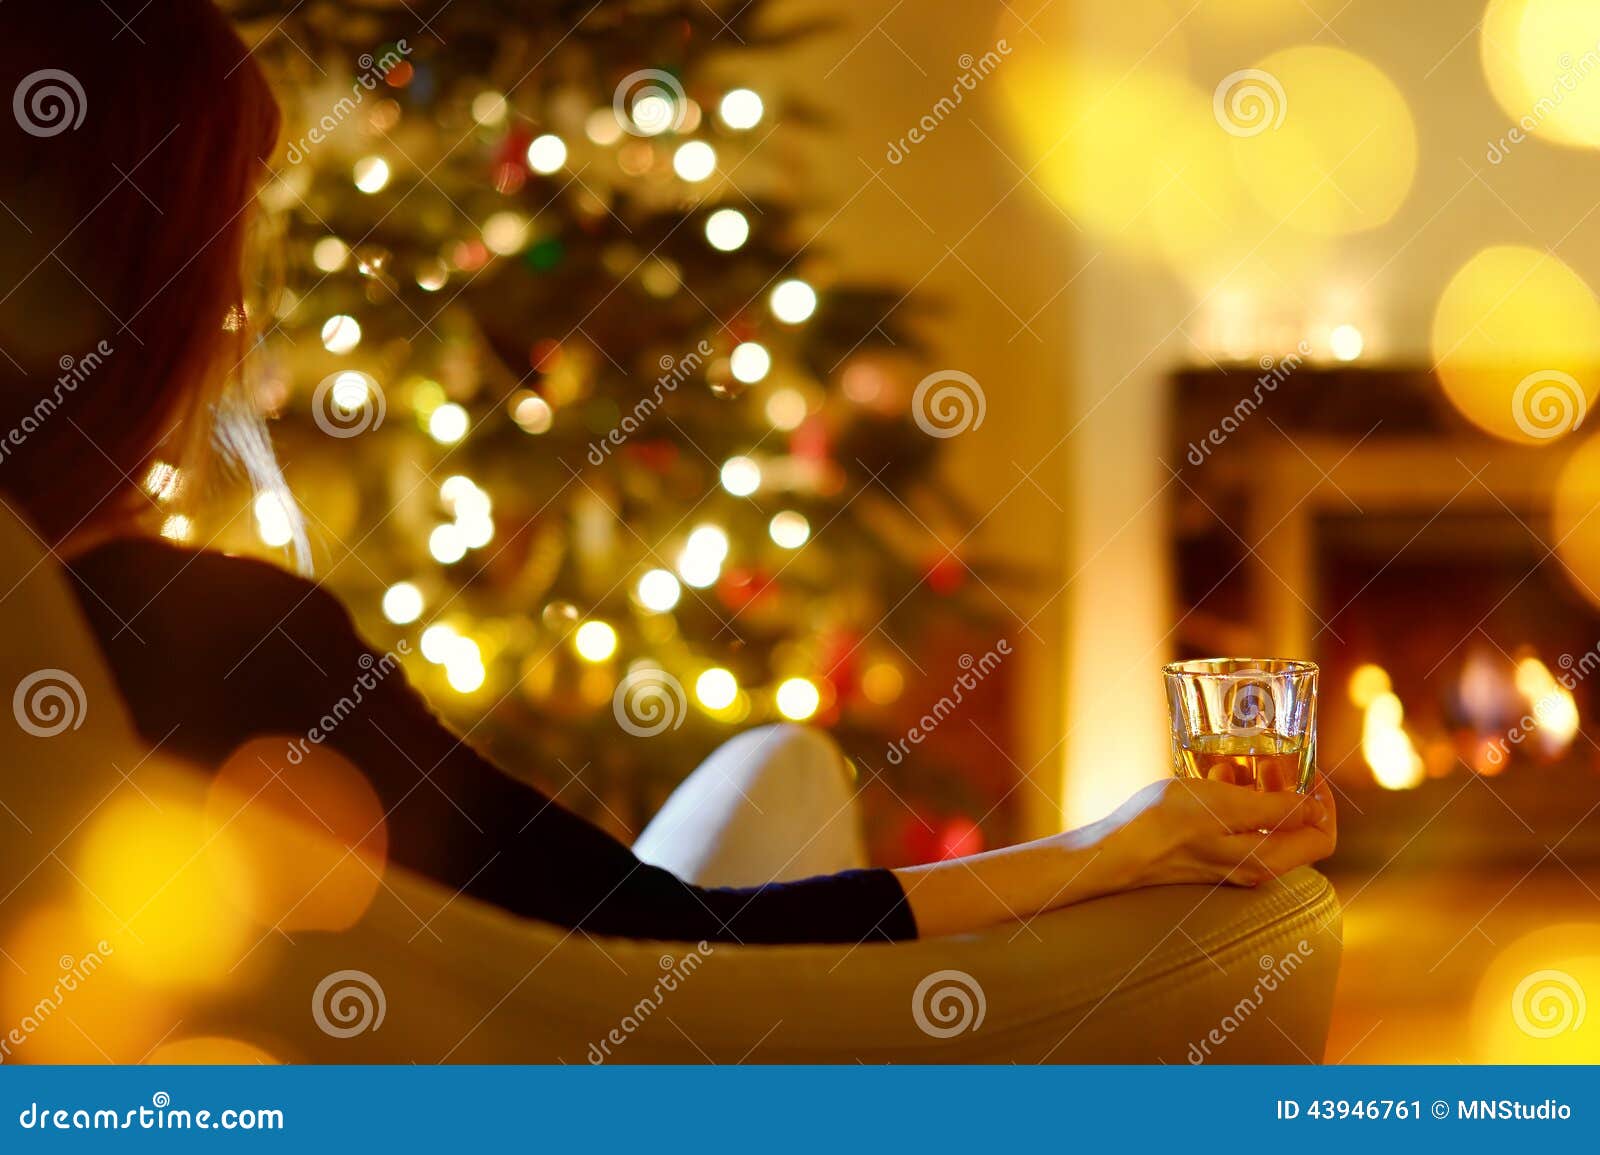 Woman with a Drink by a Fireplace on Christmas Stock Image - Image of ...